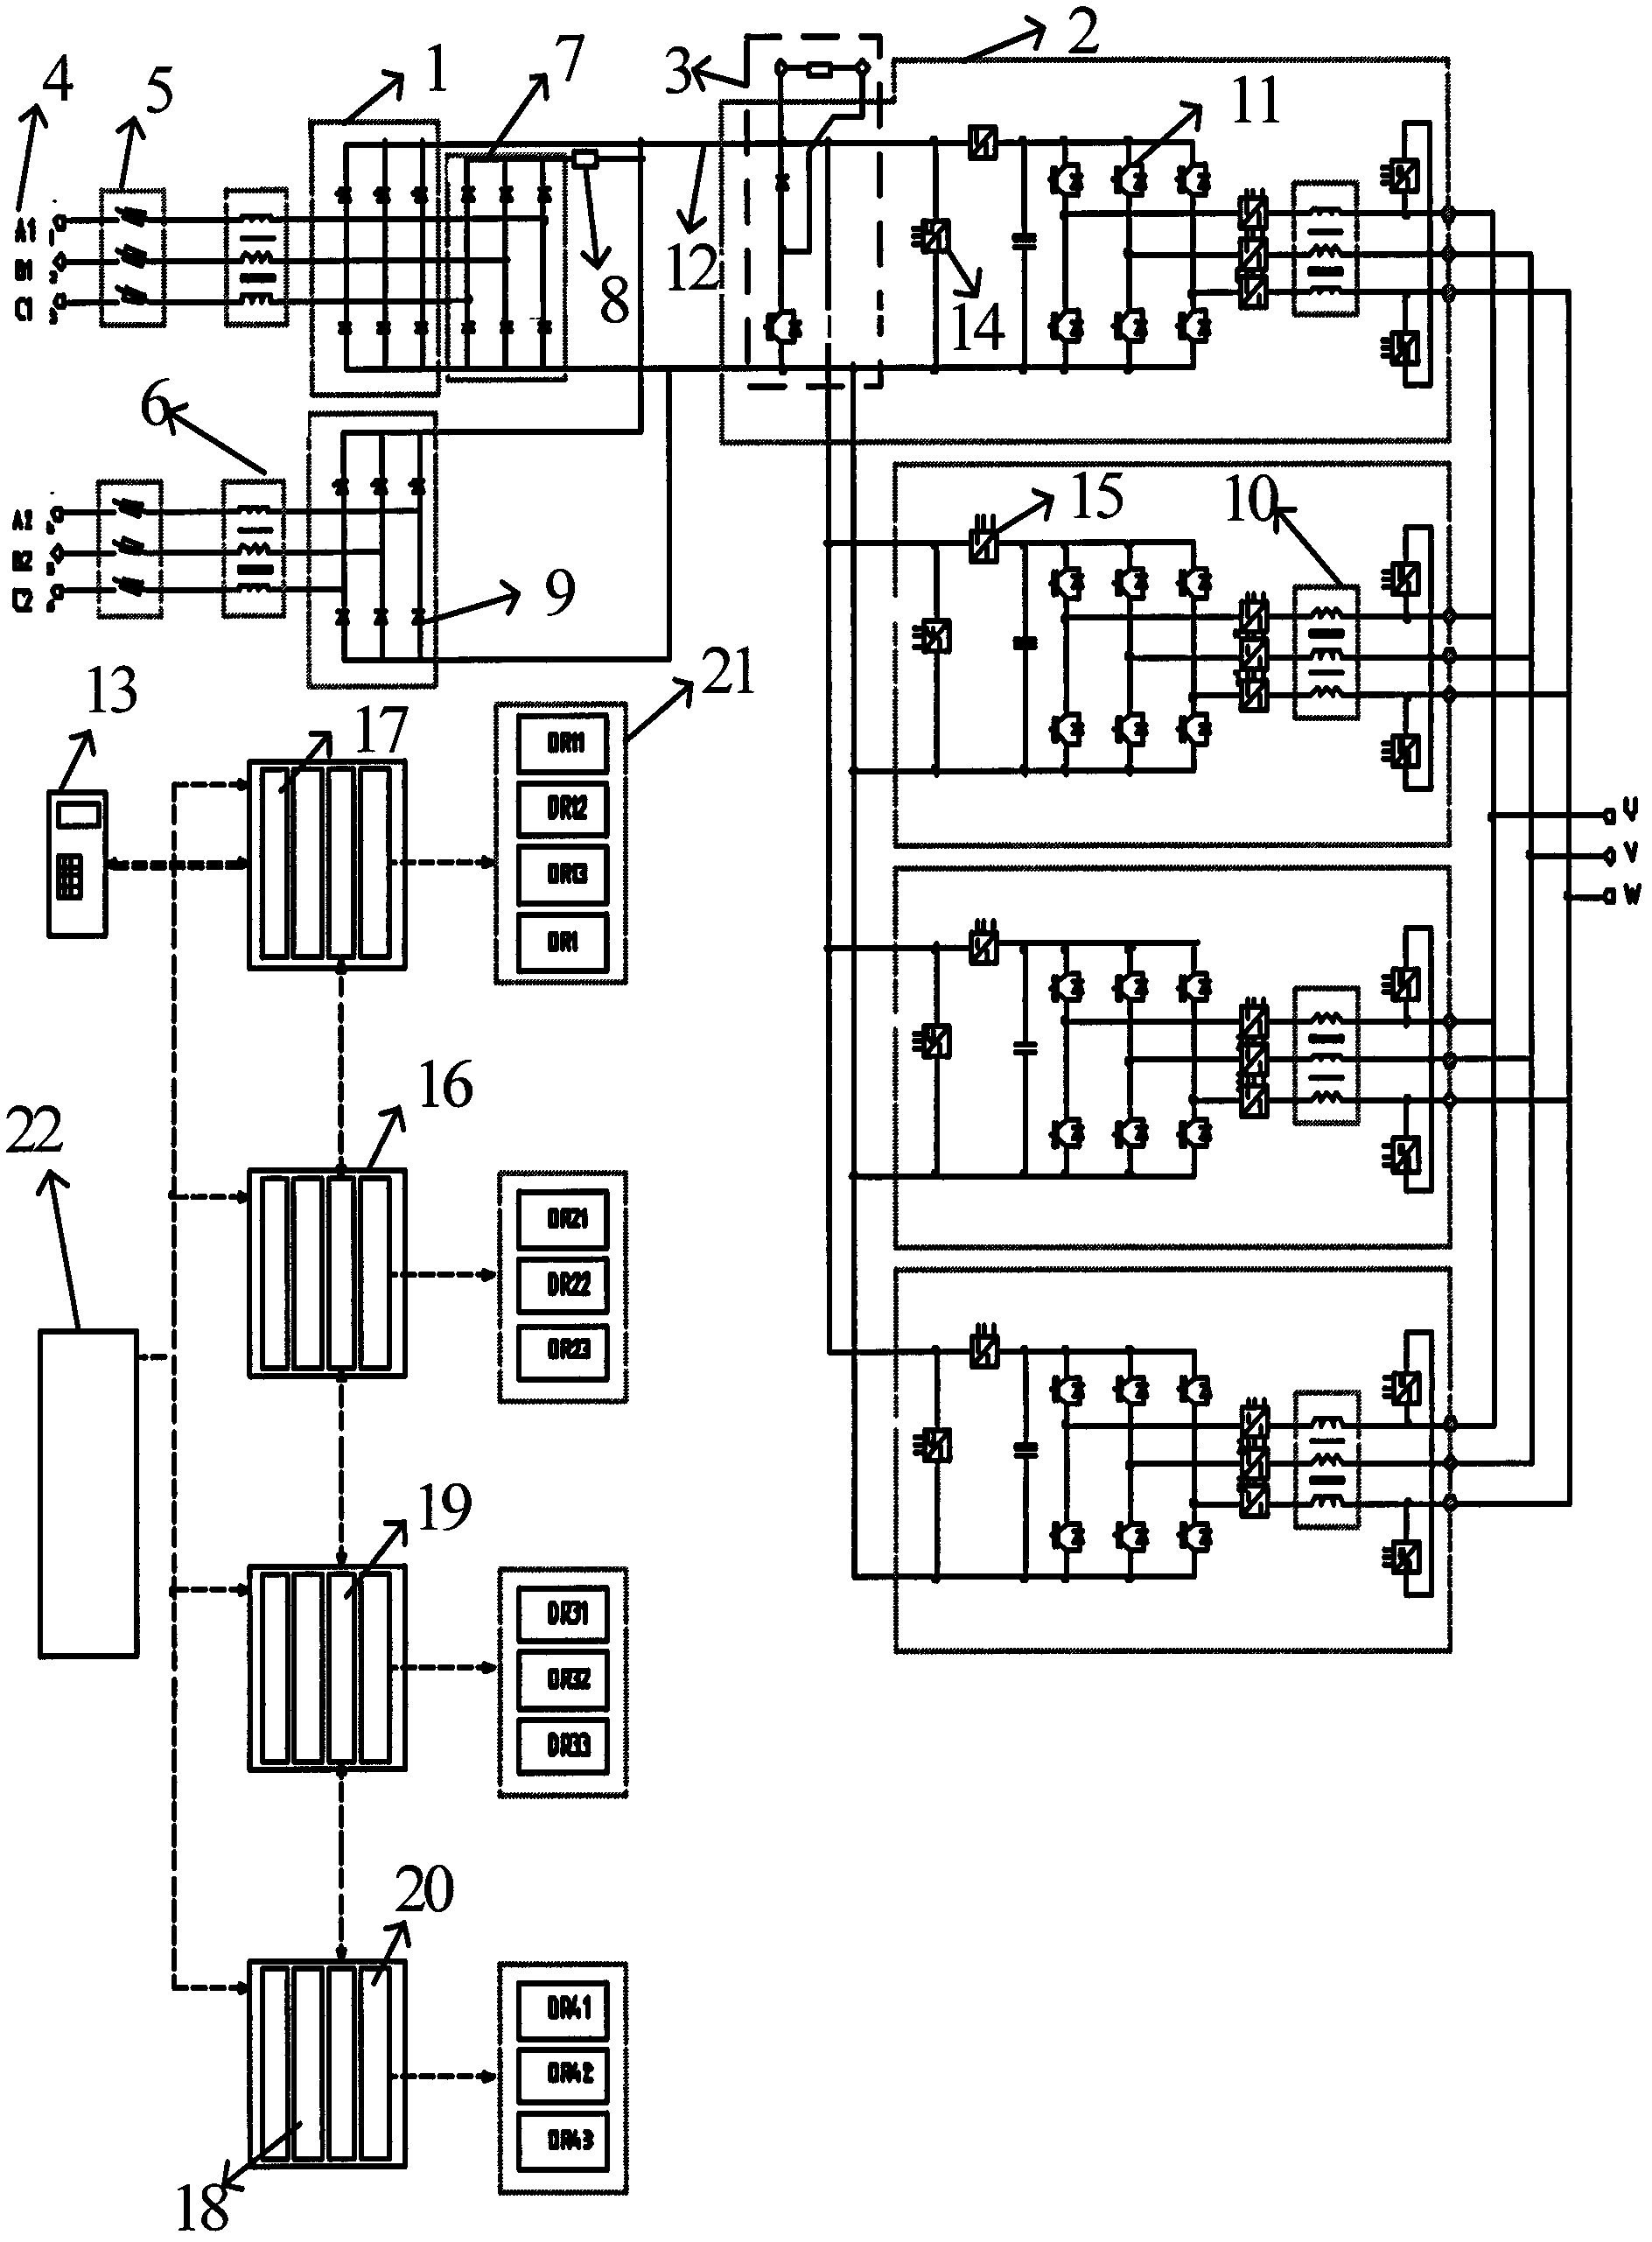 Multi-inverter module paralleling frequency conversion device for transmission system and control policy